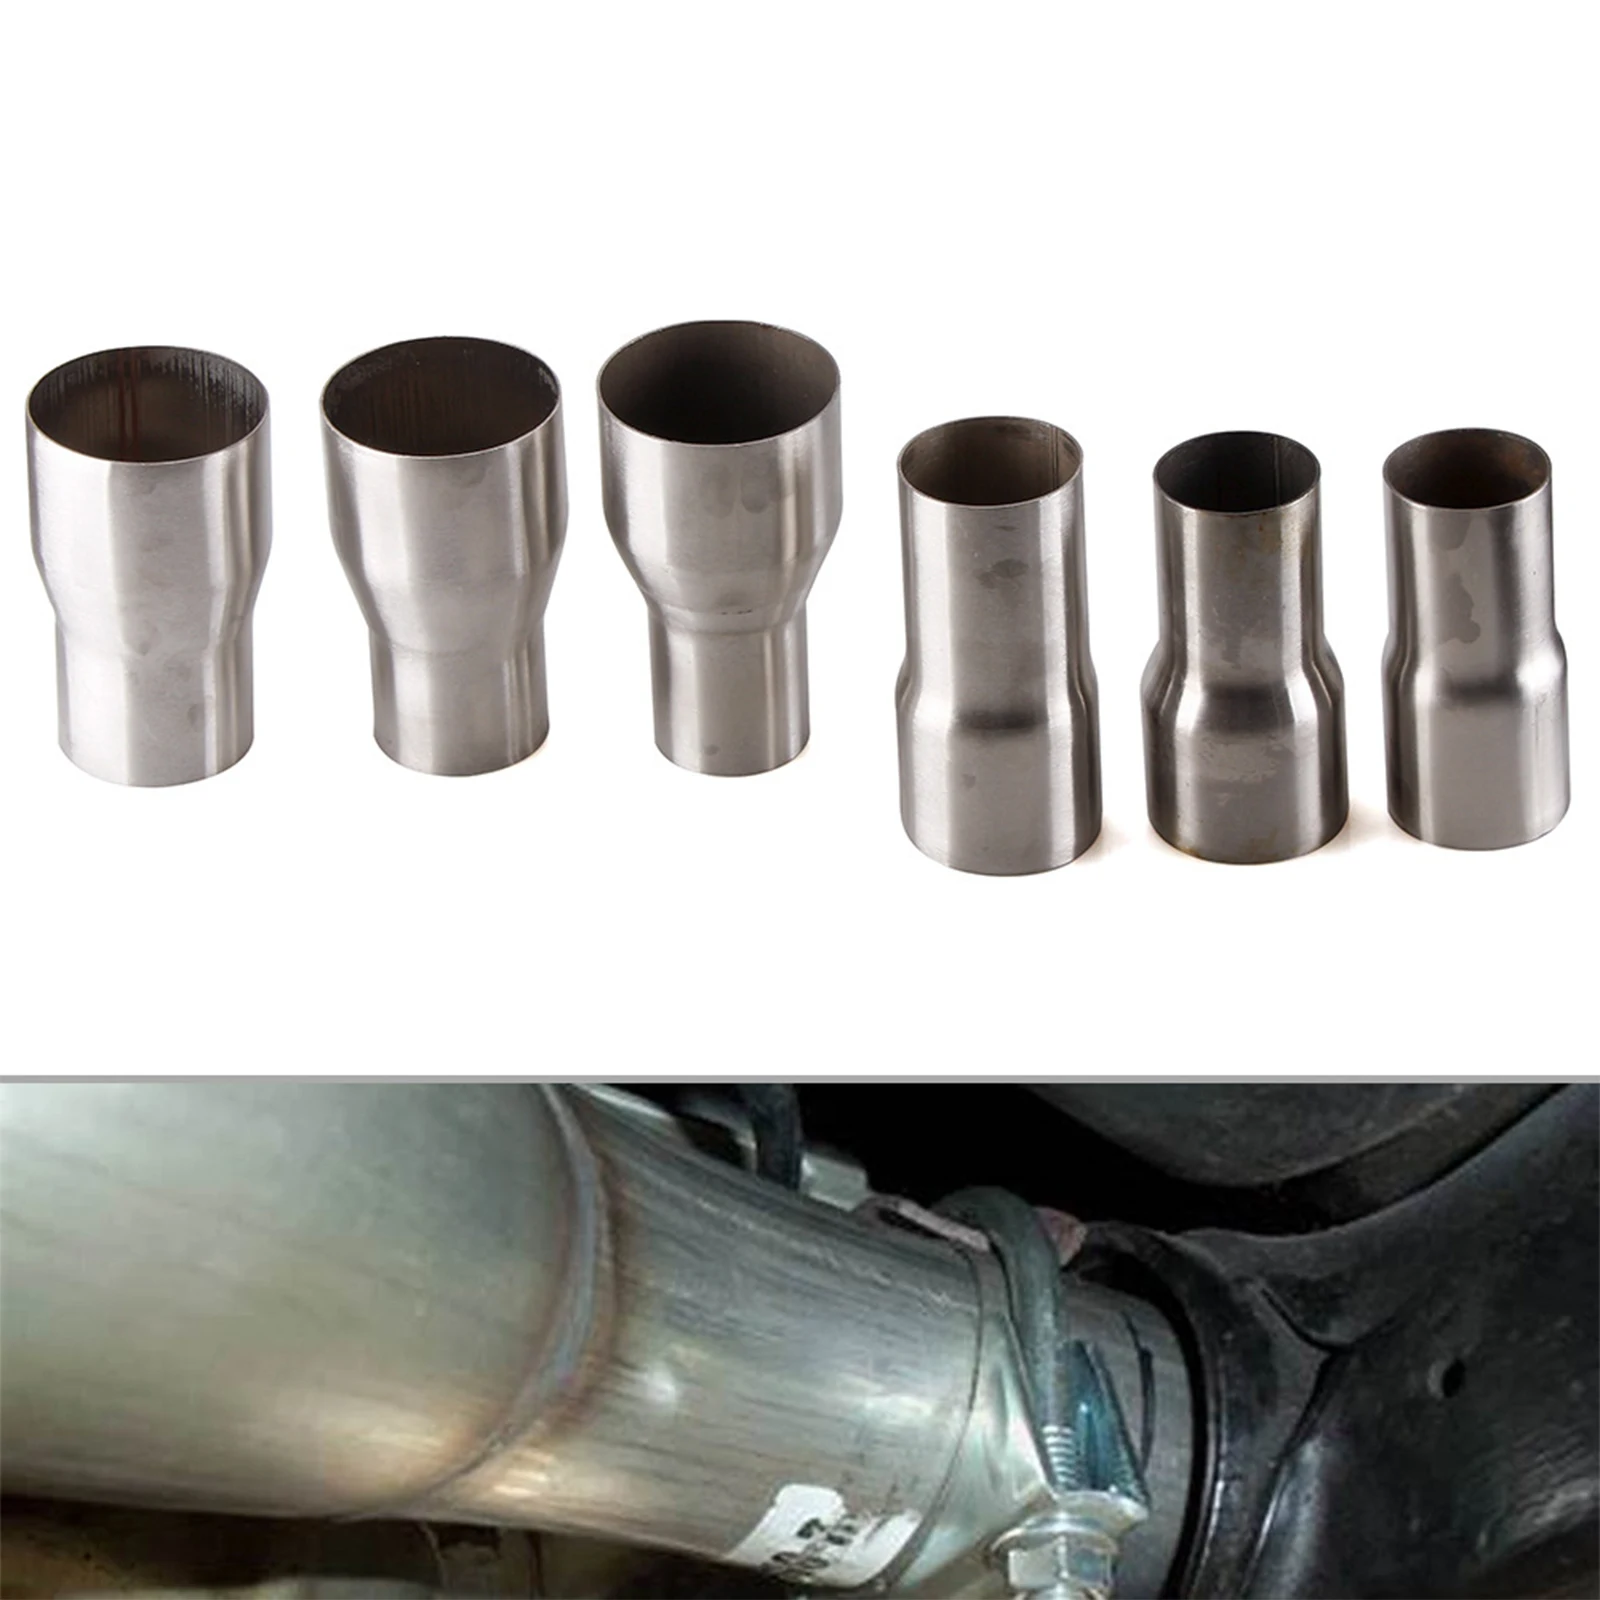 

Universal Stainless steel Straight Adapter reducer car motorcycle Exhaust Muffler pipeline welded pipe Multiple sizes available